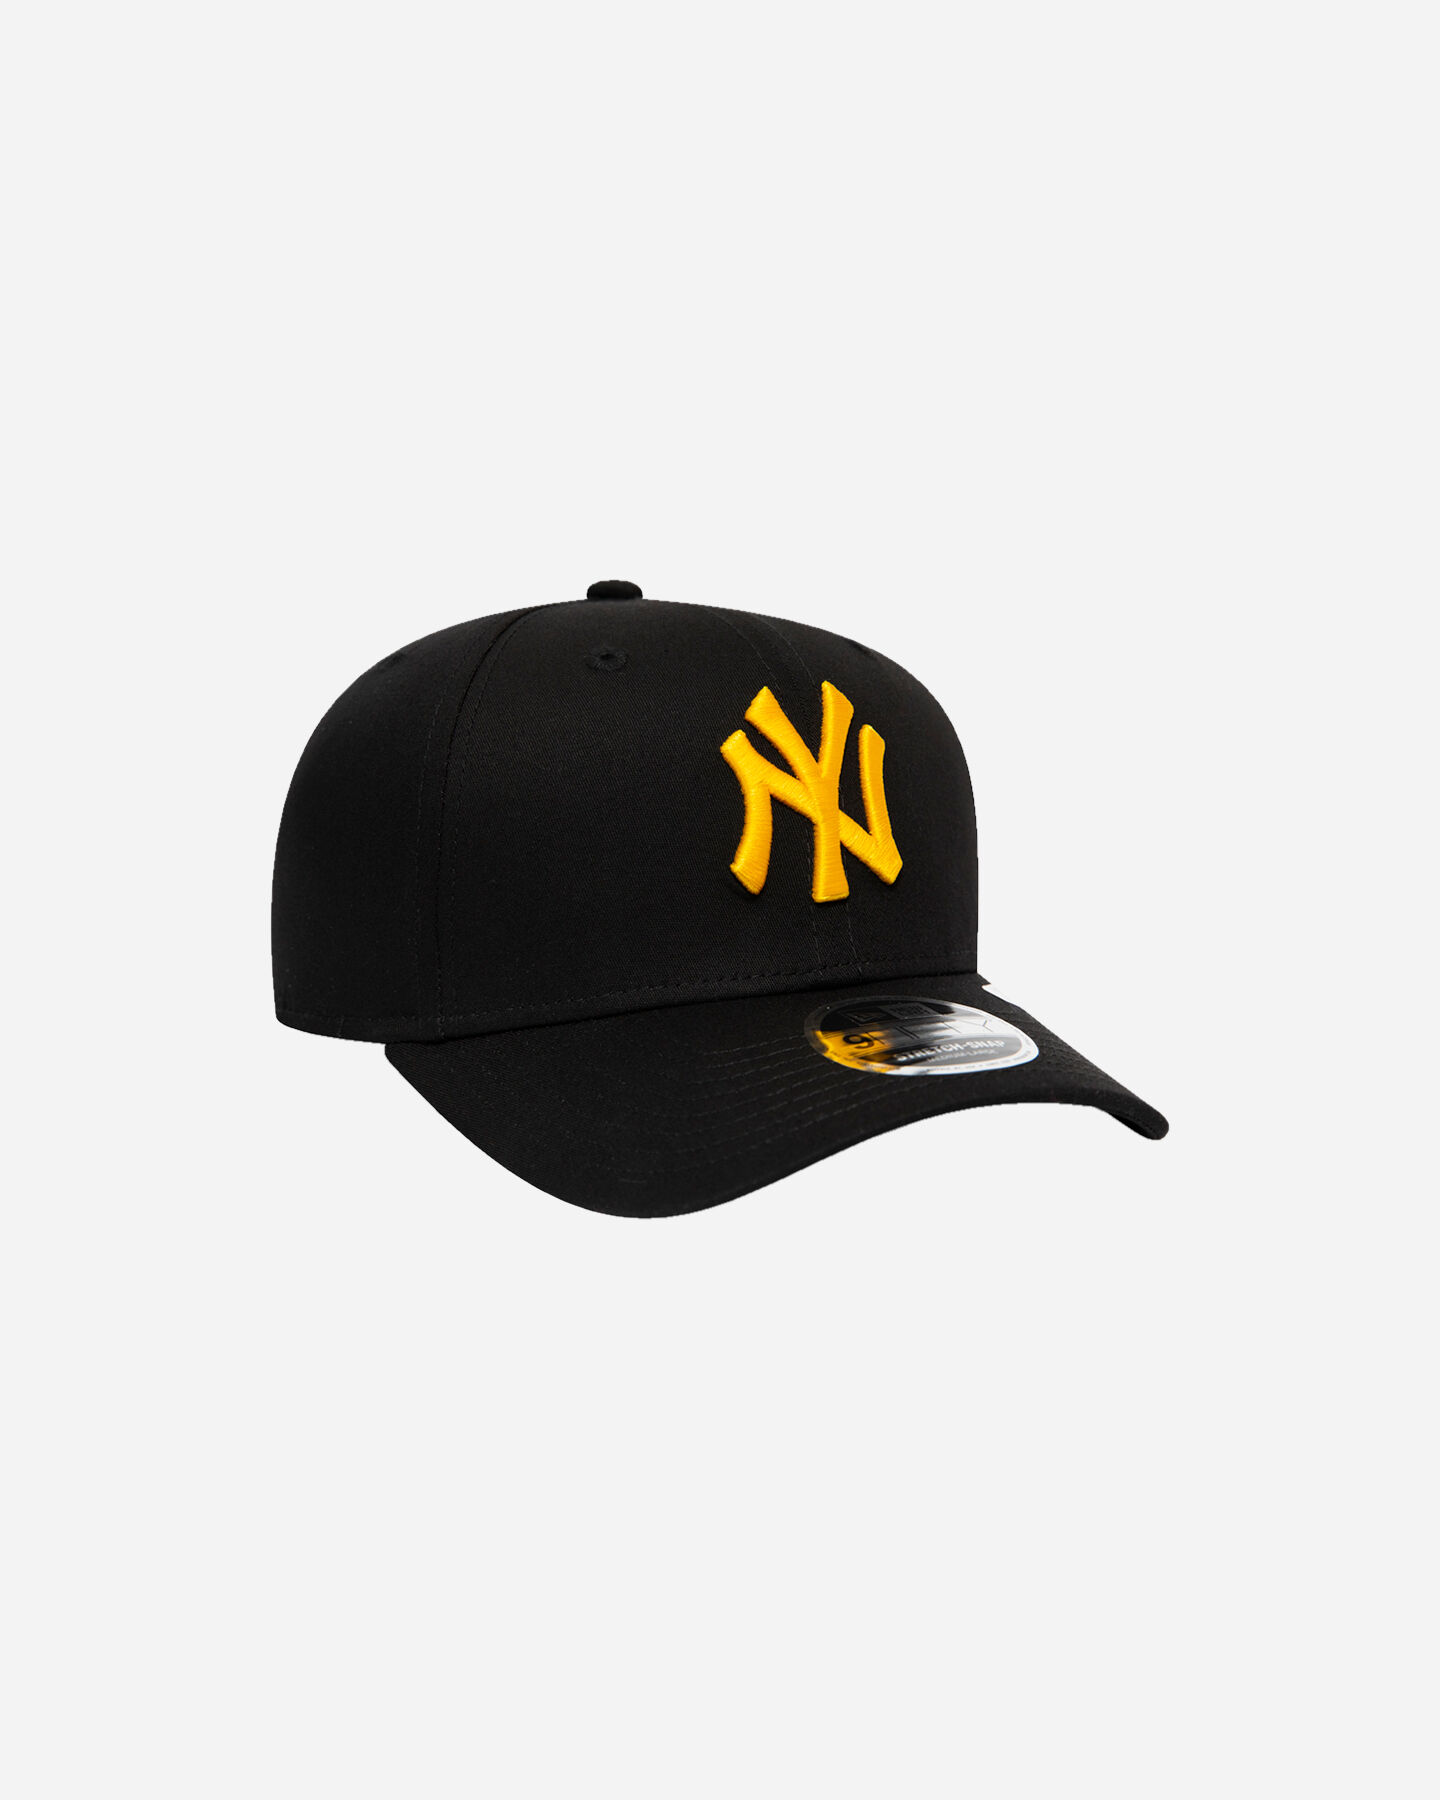  Cappellino NEW ERA NEW YORK YANKEES 9FIFTY STRETCH S5170061|001|SM scatto 2